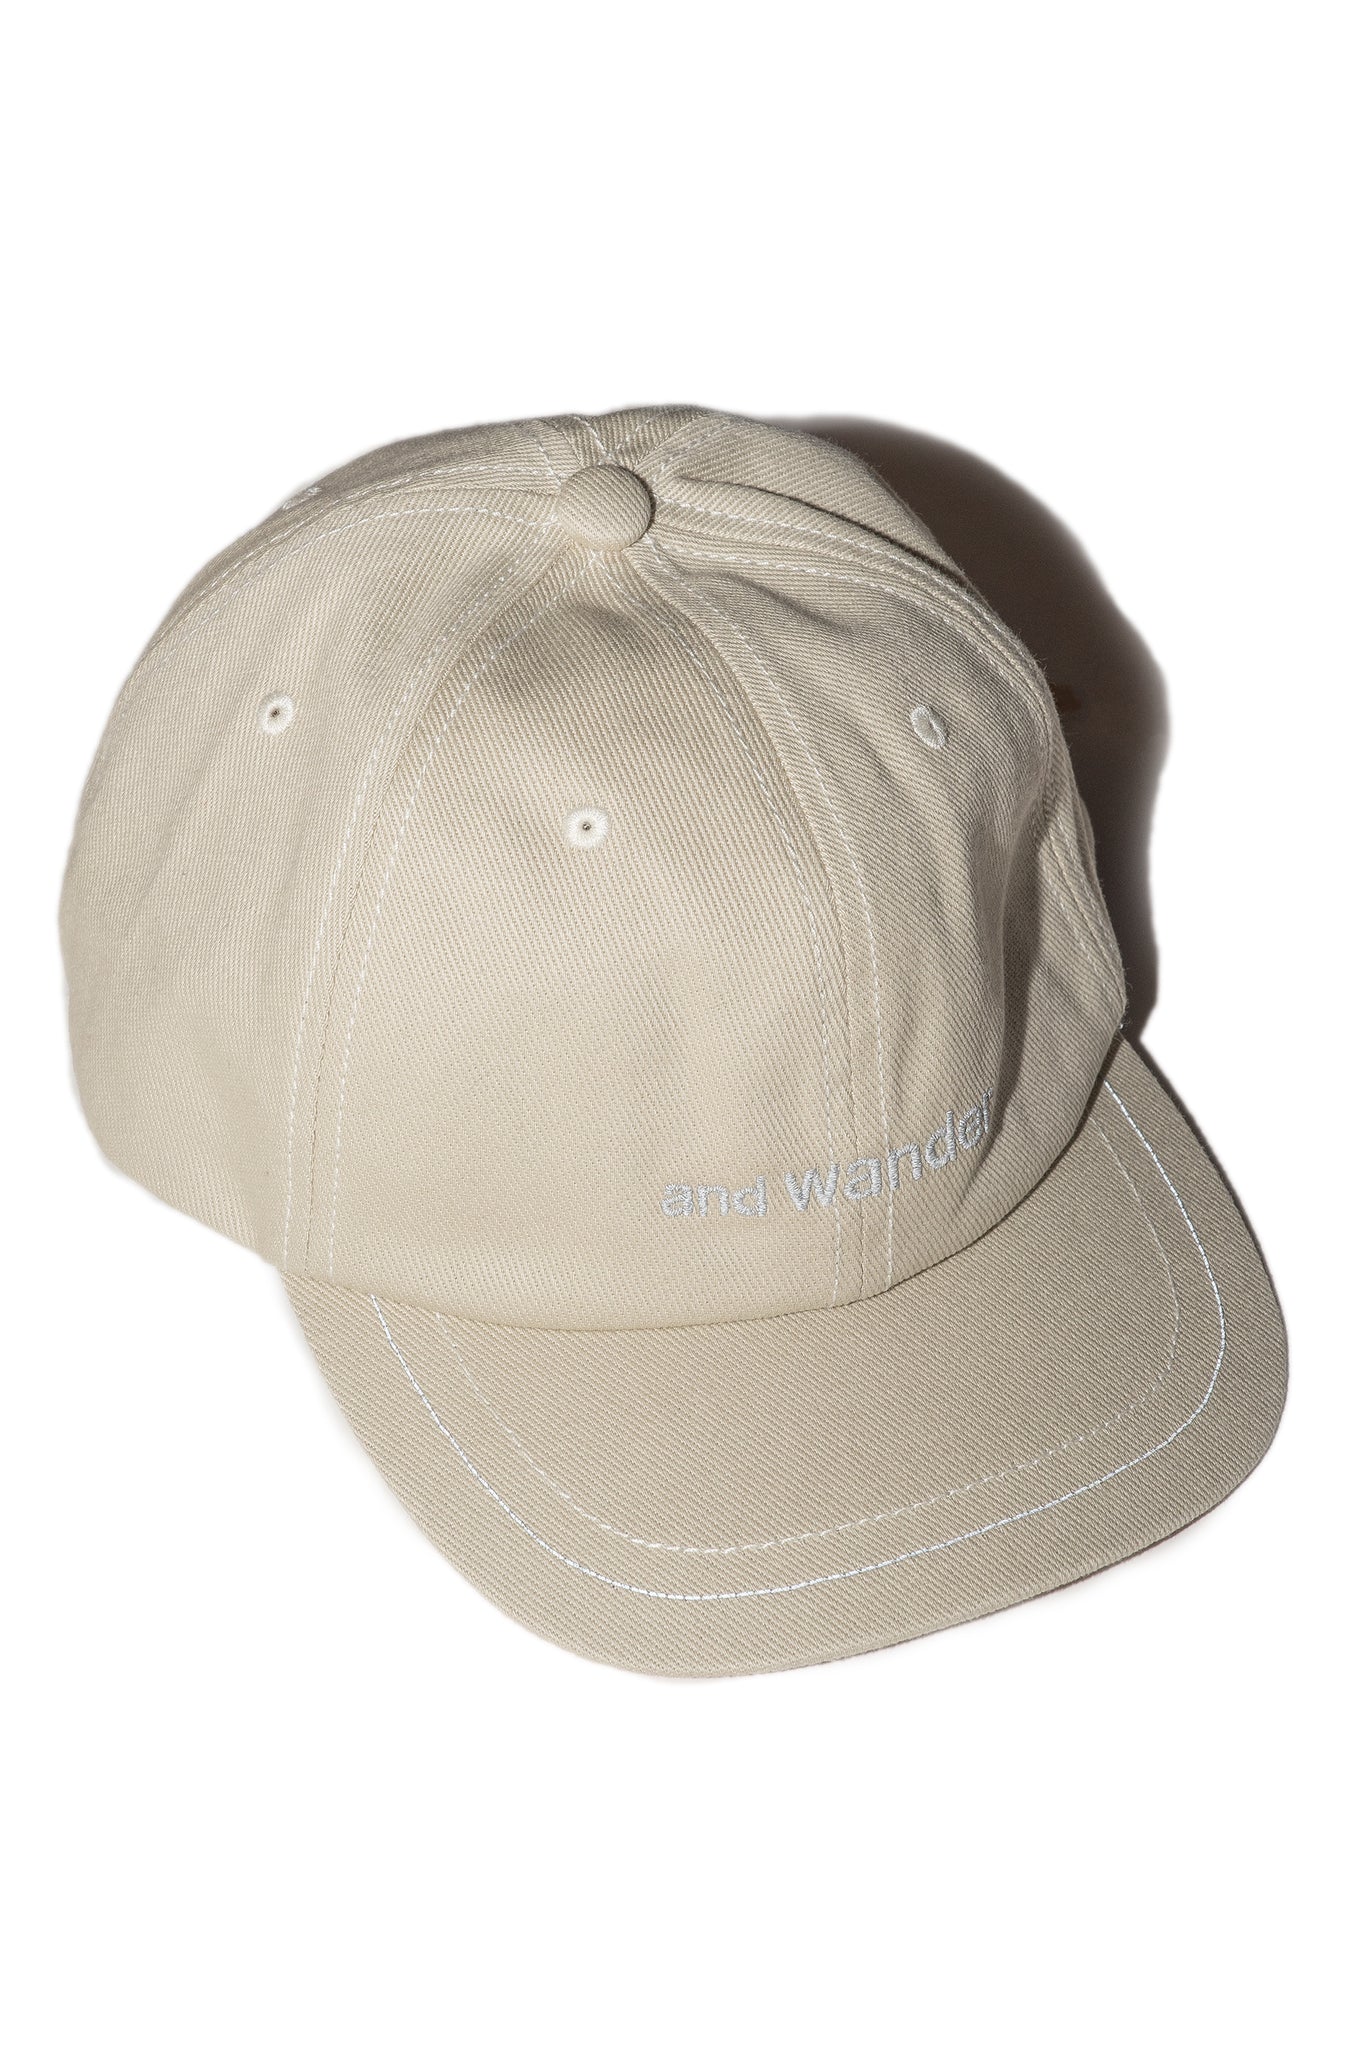 understory-shop - AND WANDER - COTTON TWILL CAP